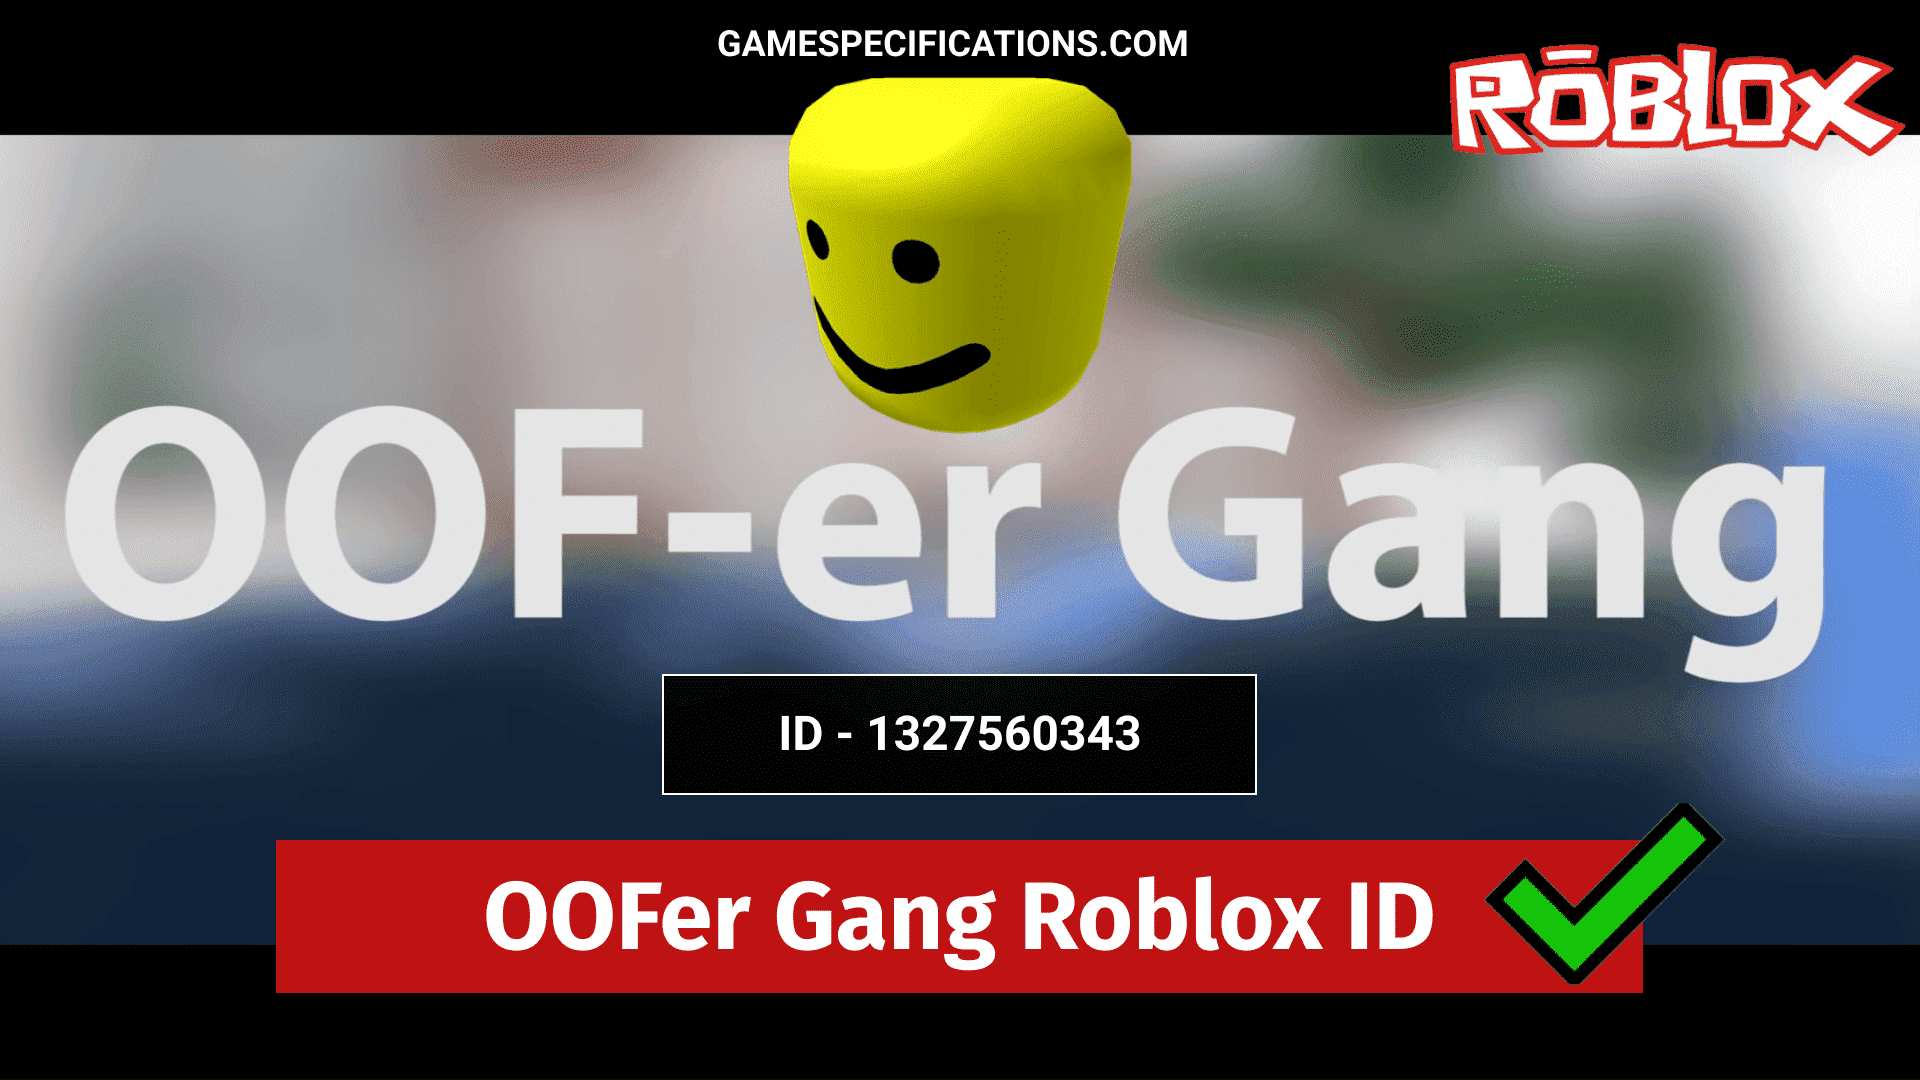 Oofer Gang Roblox Id Codes 2021 Game Specifications - roblox oofer gang id